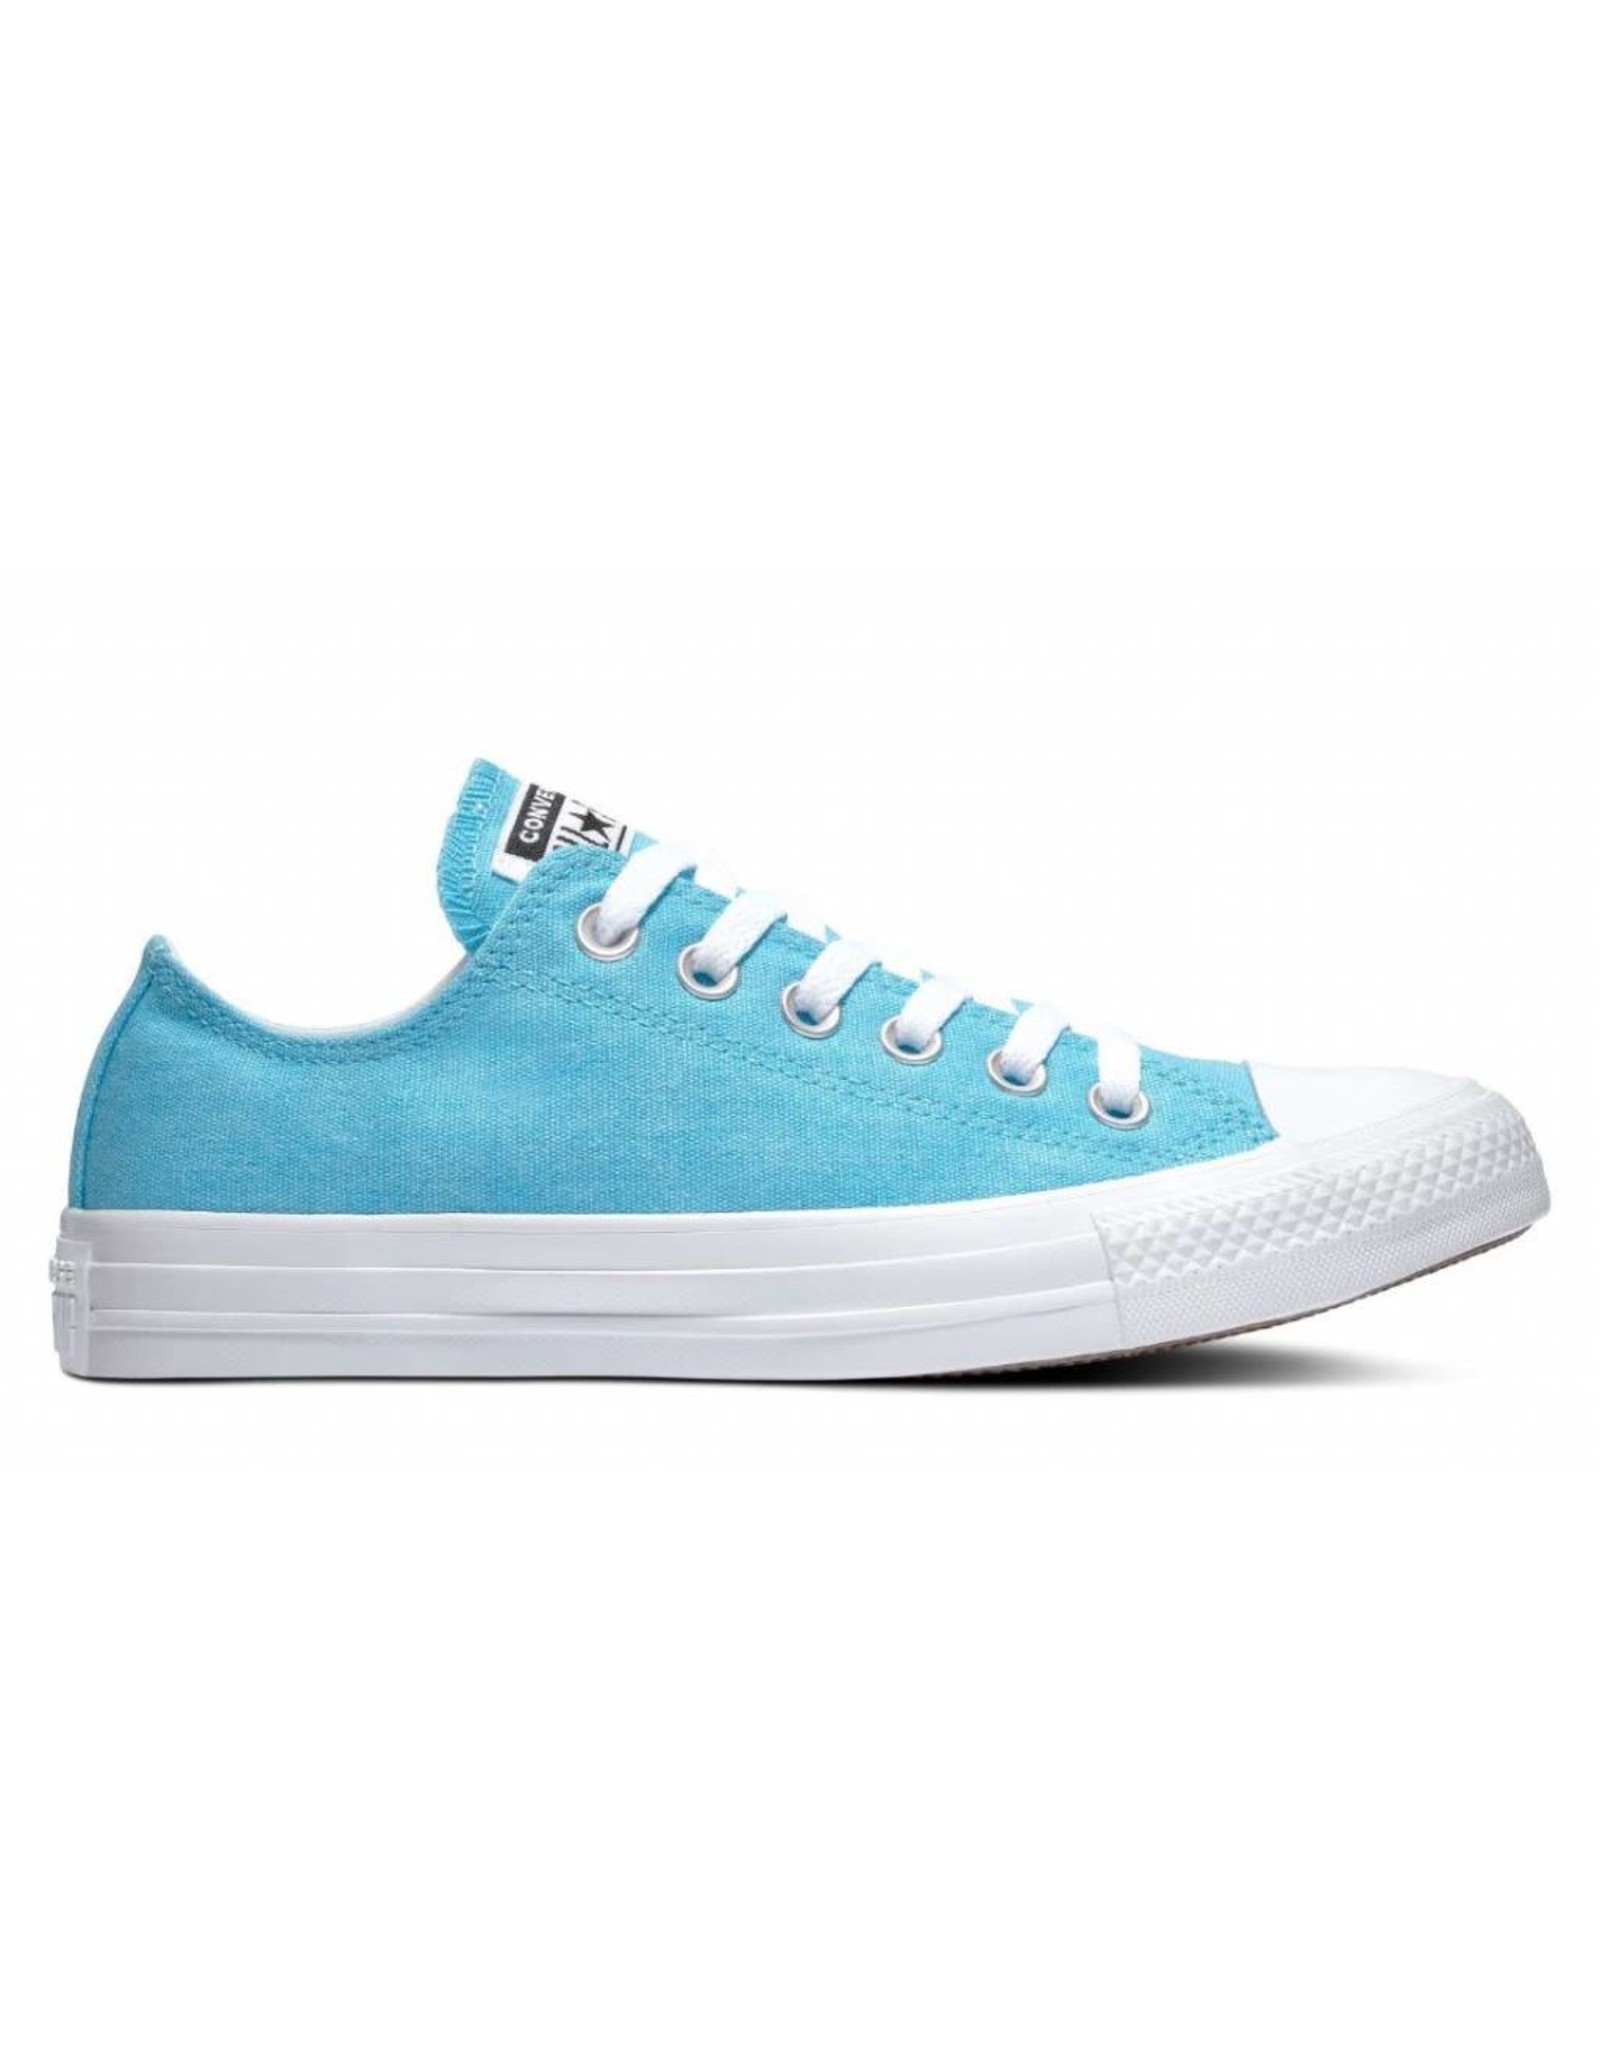 CHUCK TAYLOR ALL STAR OX GNARLY BLUE/WHITE/WHITE C13GN-163182C